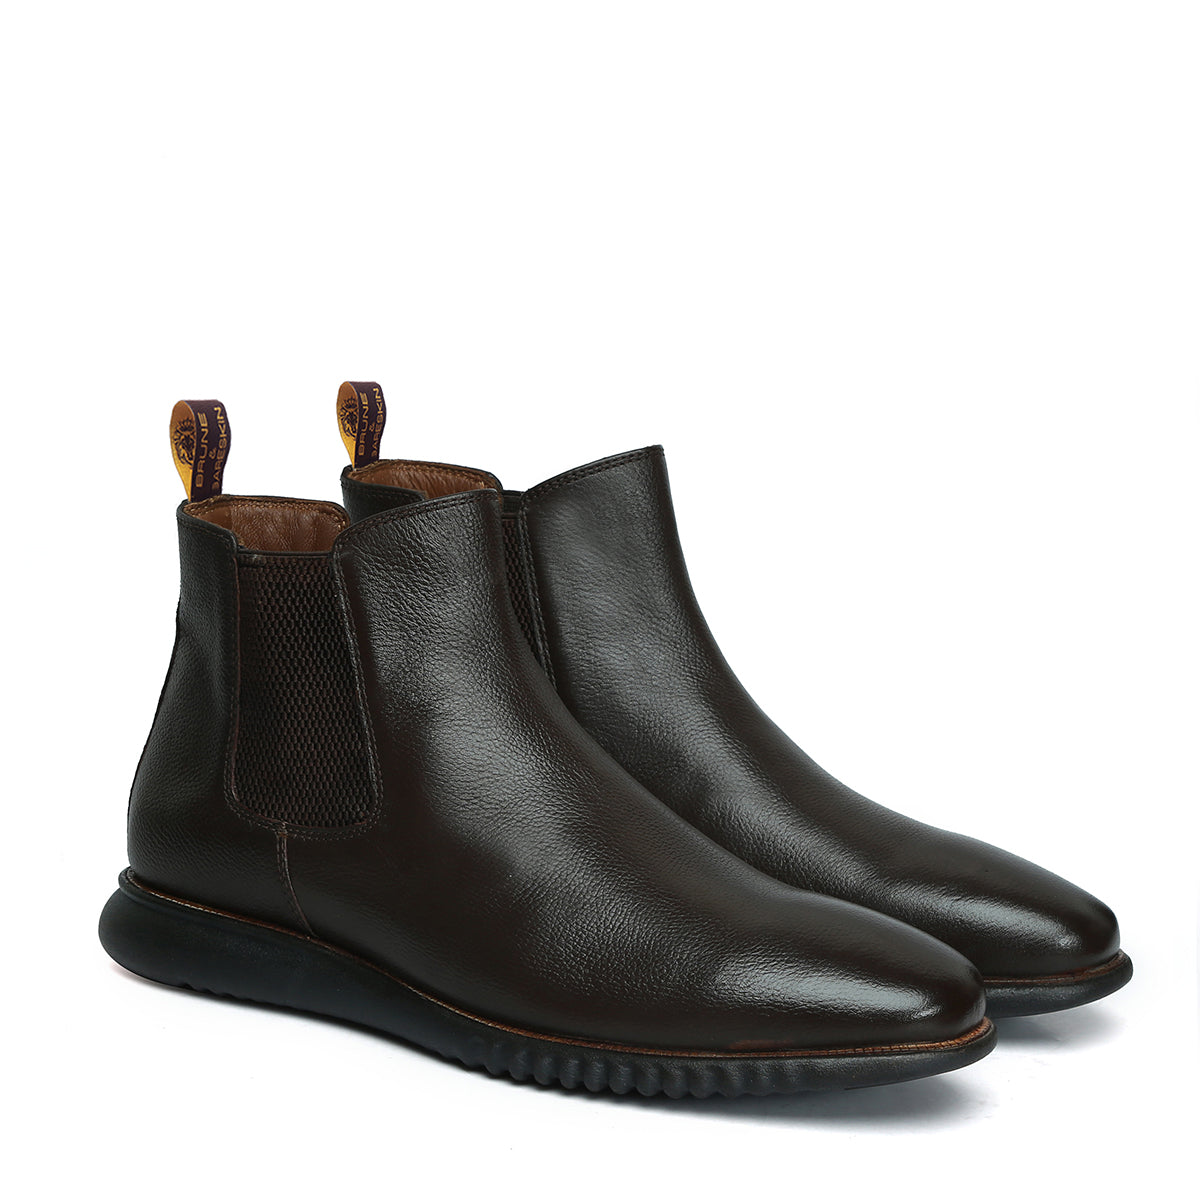 Dark Brown Grain Textured Leather Chelsea Boots with Light Weight Sole by Brune & Bareskin